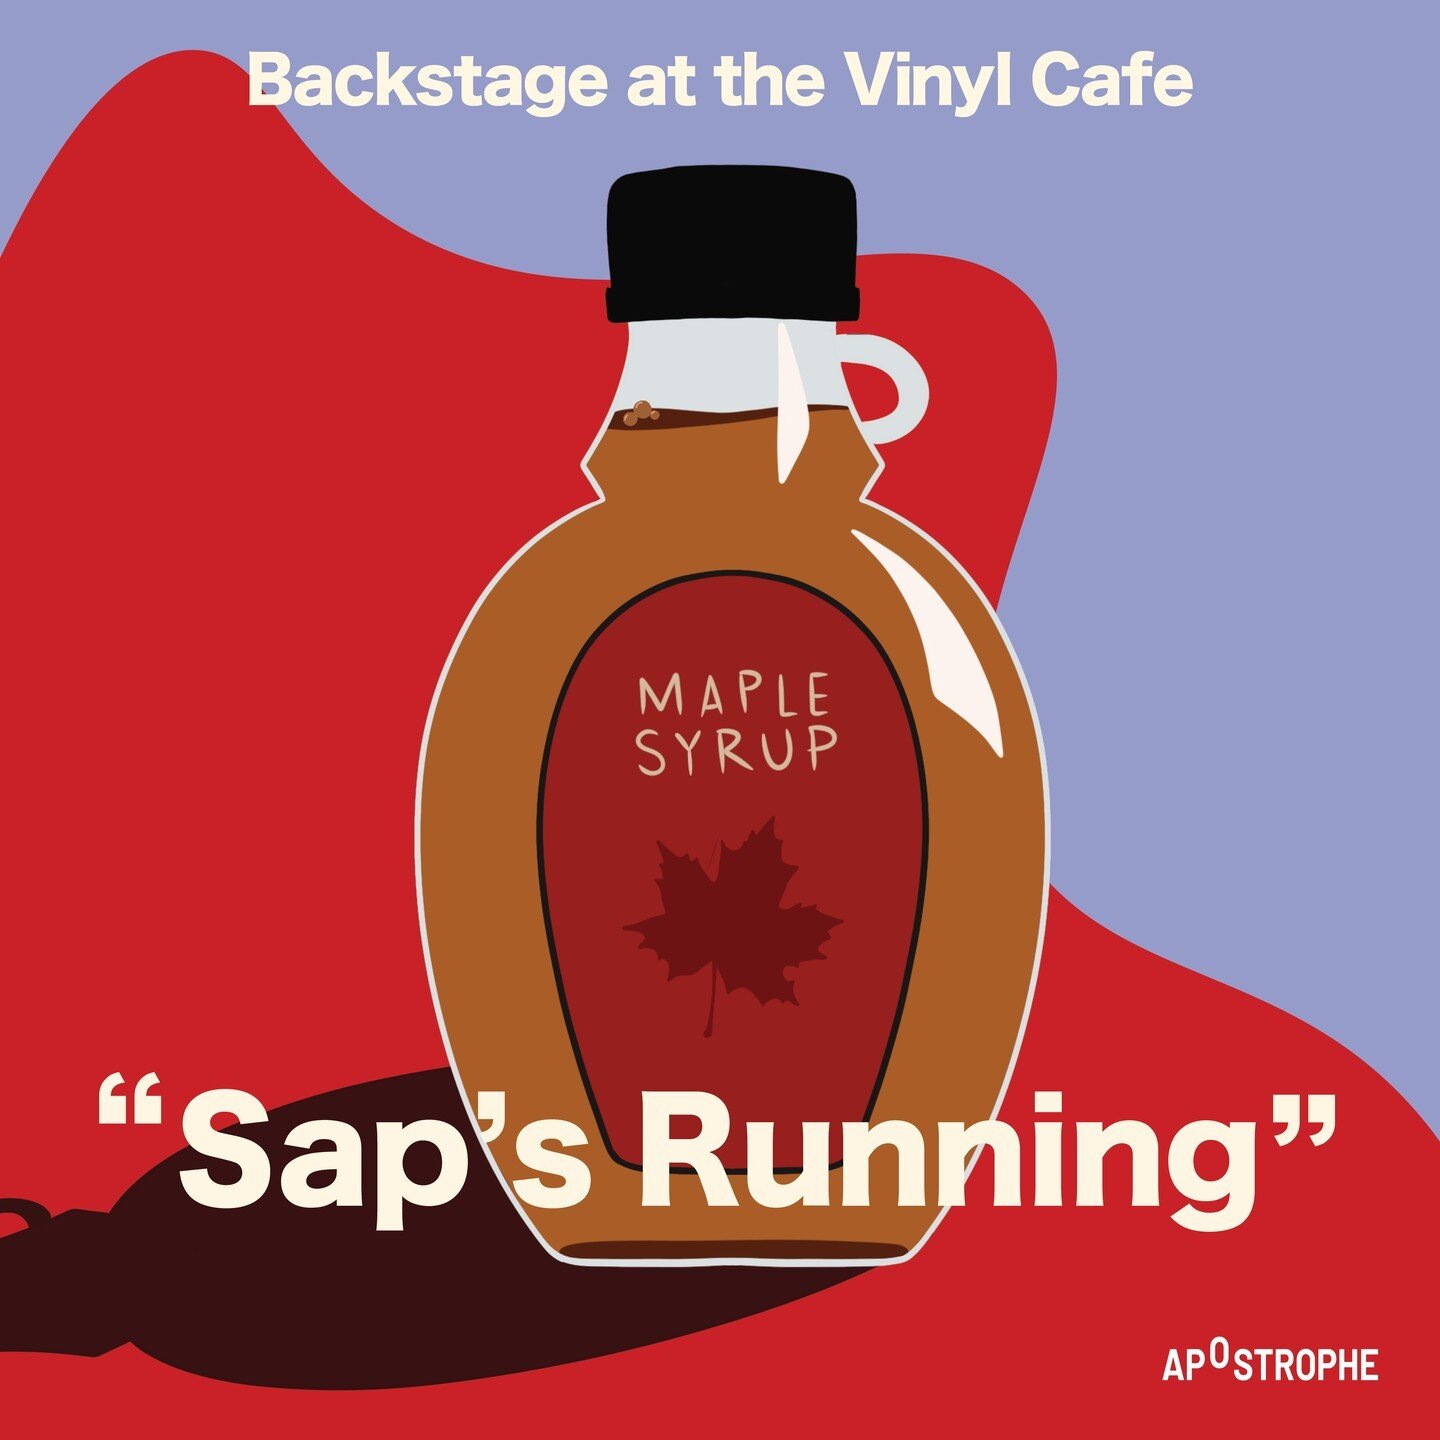 &quot;It is the best maple syrup I have ever had, said Sam.&quot; 

We&rsquo;re celebrating one of the wonders of spring on the pod this week: Stuart waxes lyrical about his favourite tipple, maple syrup, then tells a story about the time Dave tried 